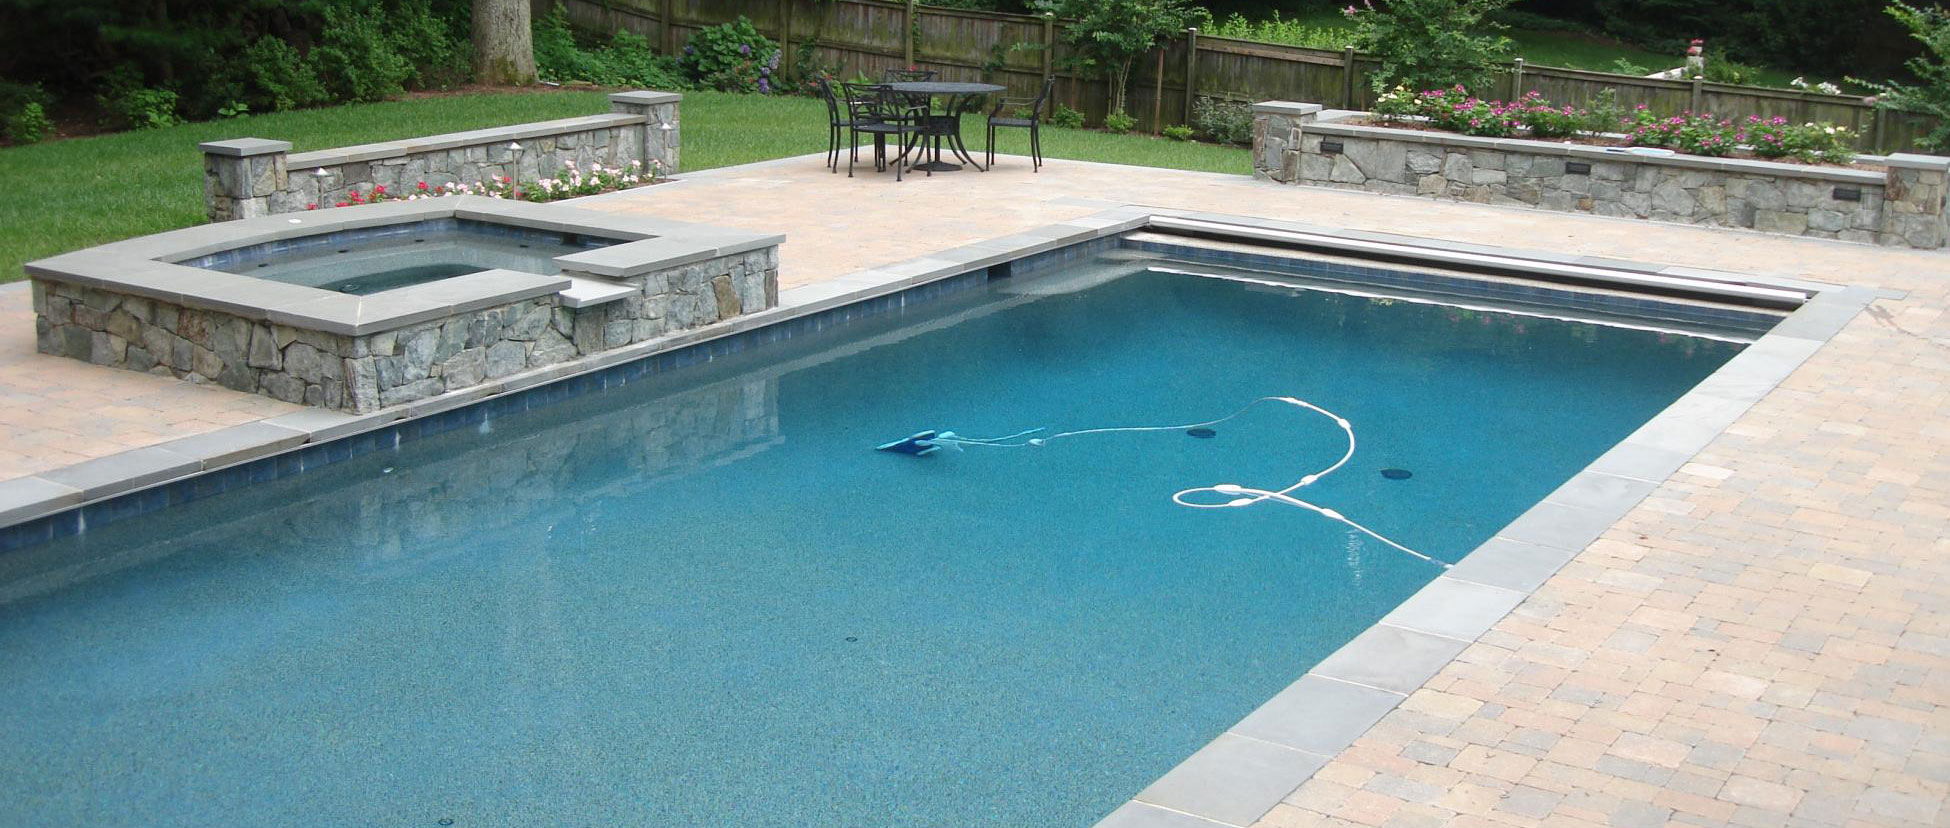 How To Pick A Cleaning System For Your New Pool Paradise Pools